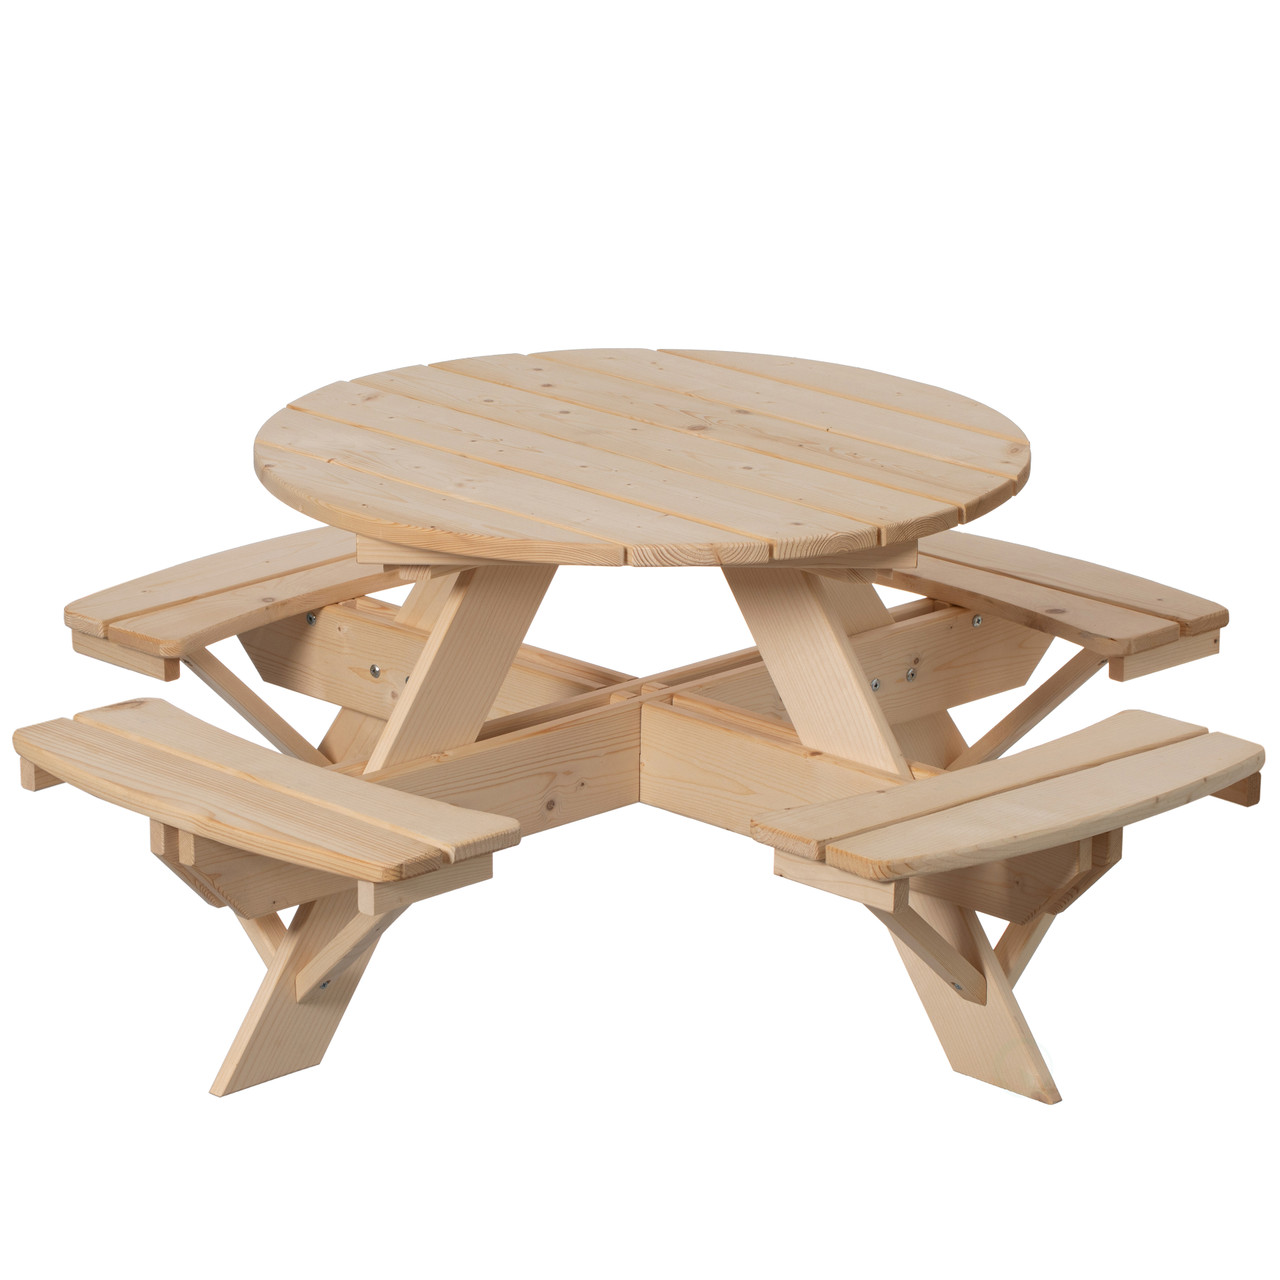 Wooden Crafting Table, Solid Wood Crafting Table